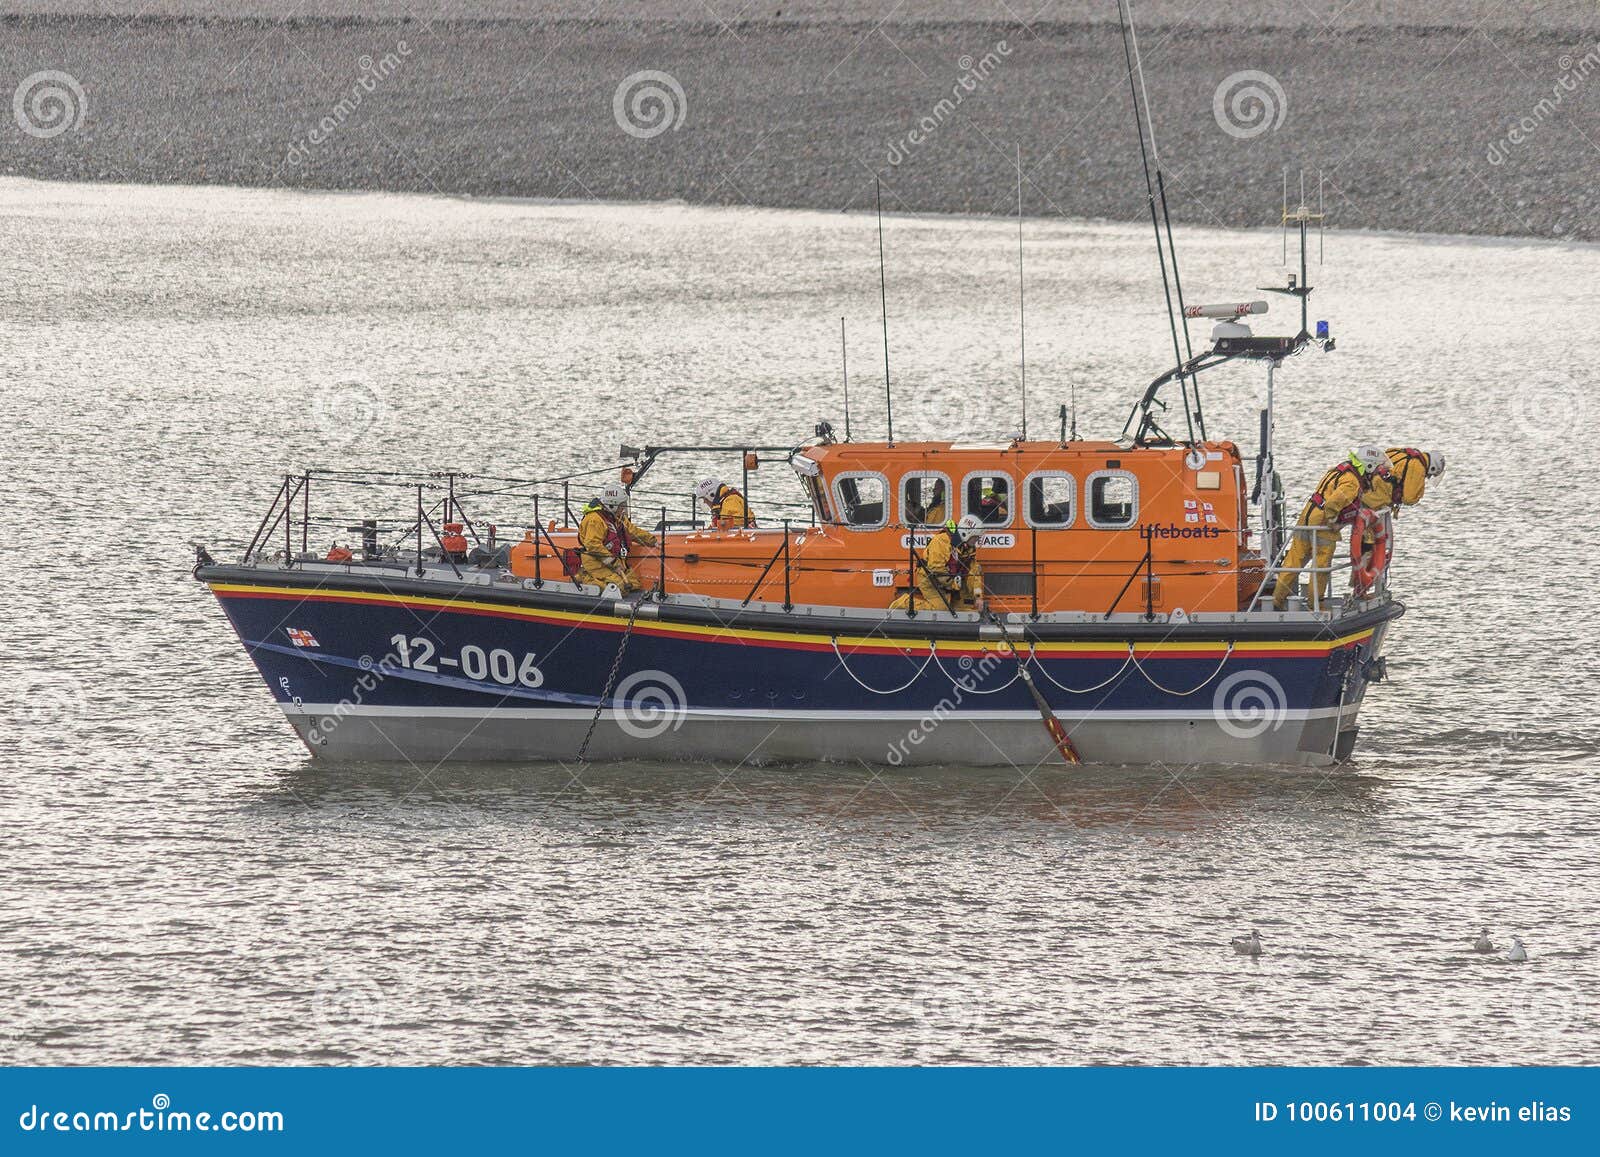 Rnli Lifeboats Editorial Stock Image Image Of Arrived 100611004